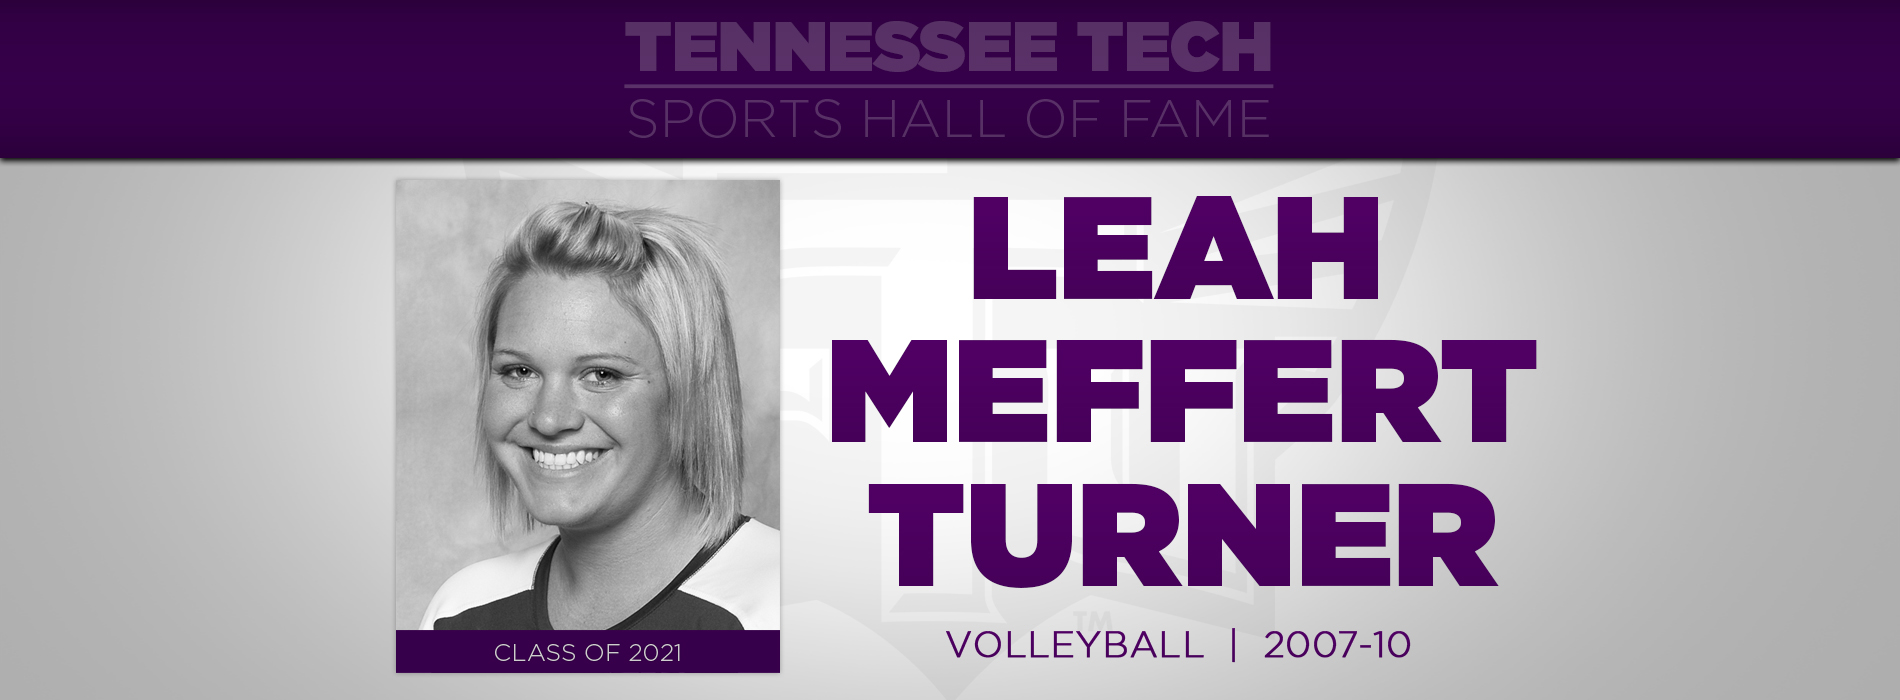 All-time kills leader Meffert Turner to be inducted into TTU Sports Hall of Fame Friday night